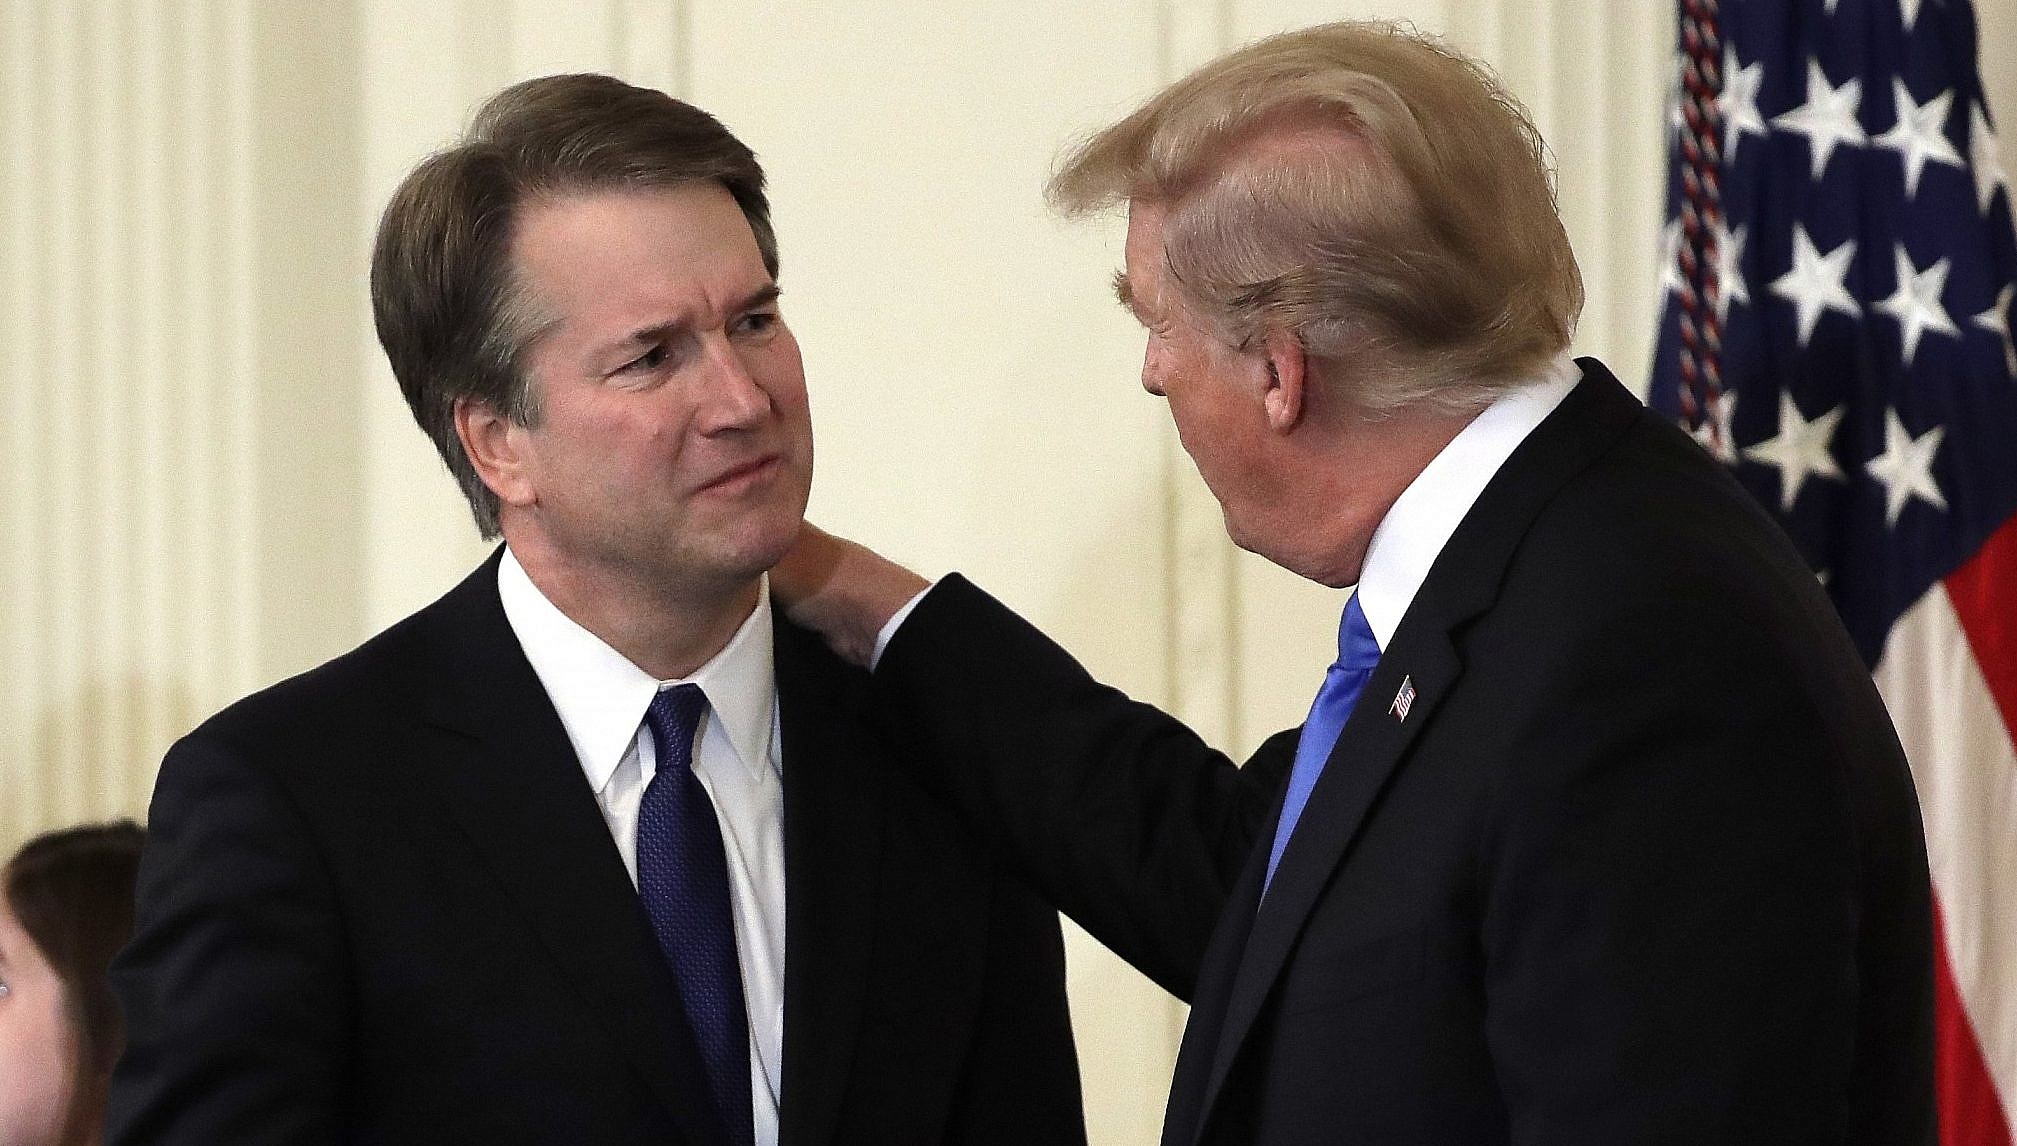 Replace Kavanaugh With a True Conservative